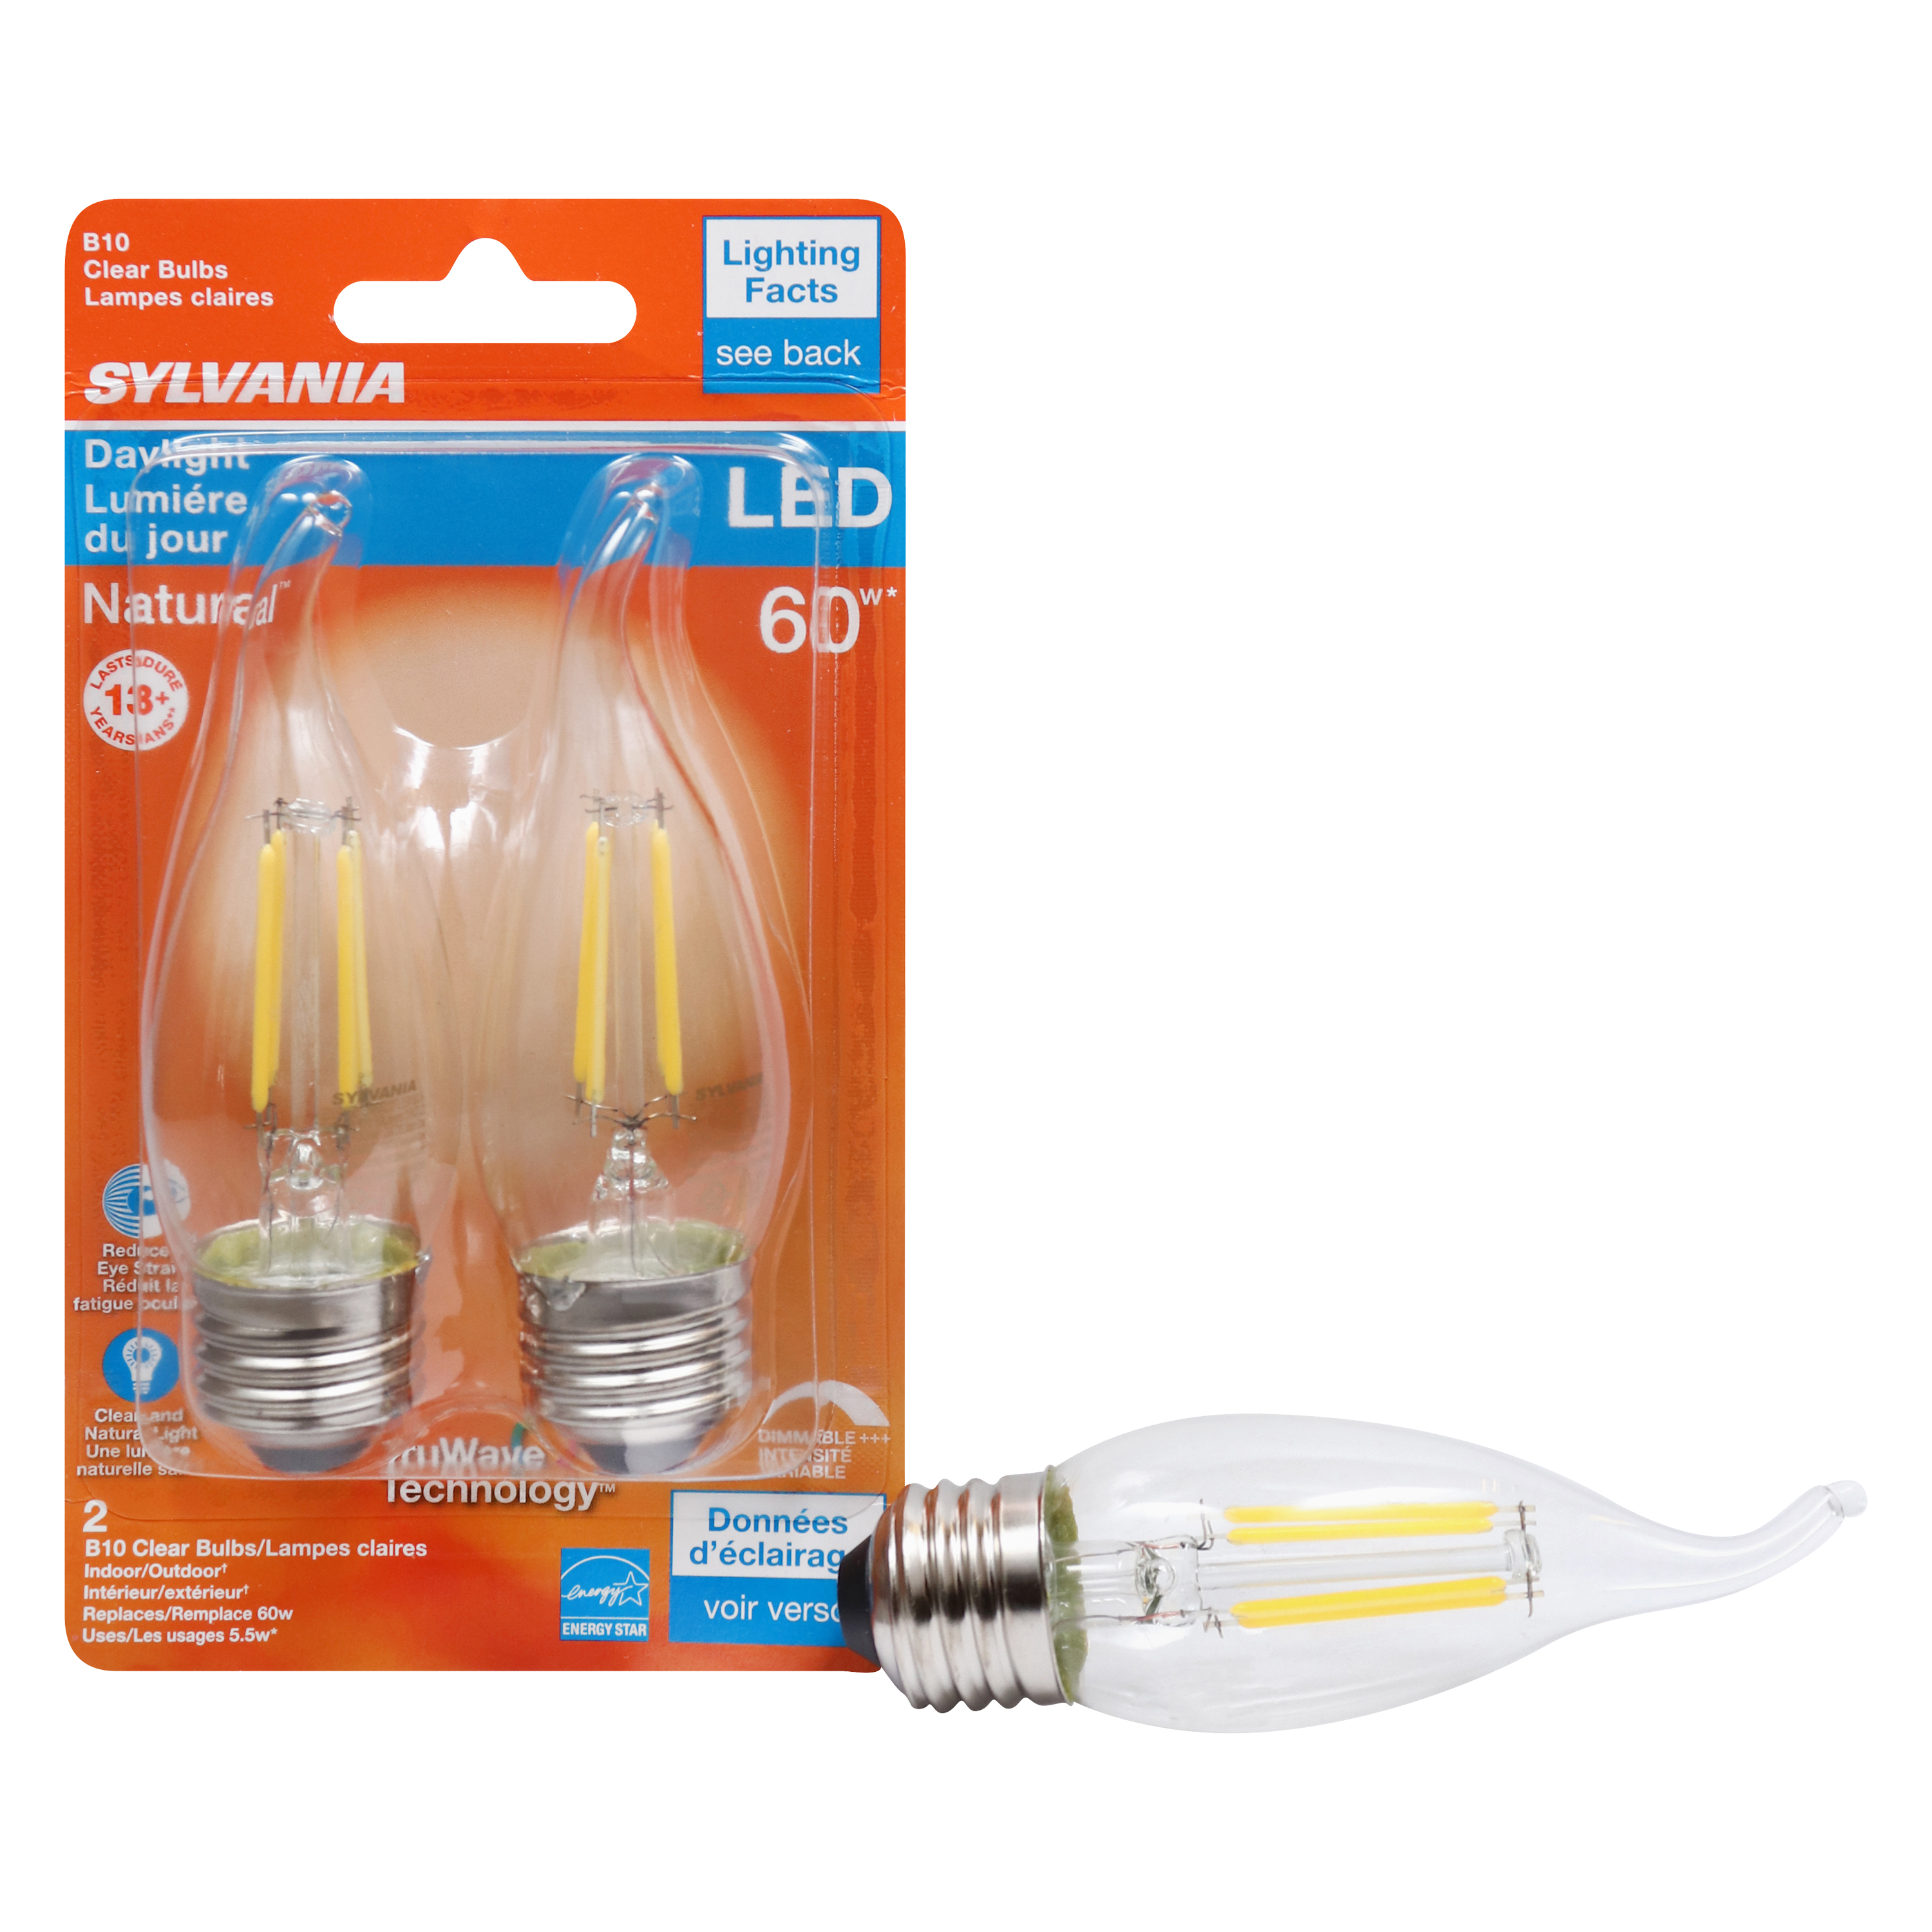 40760 Natural LED Bulb, Decorative, B10 Bent Tip Lamp, 60 W Equivalent, E26 Lamp Base, Dimmable, Clear